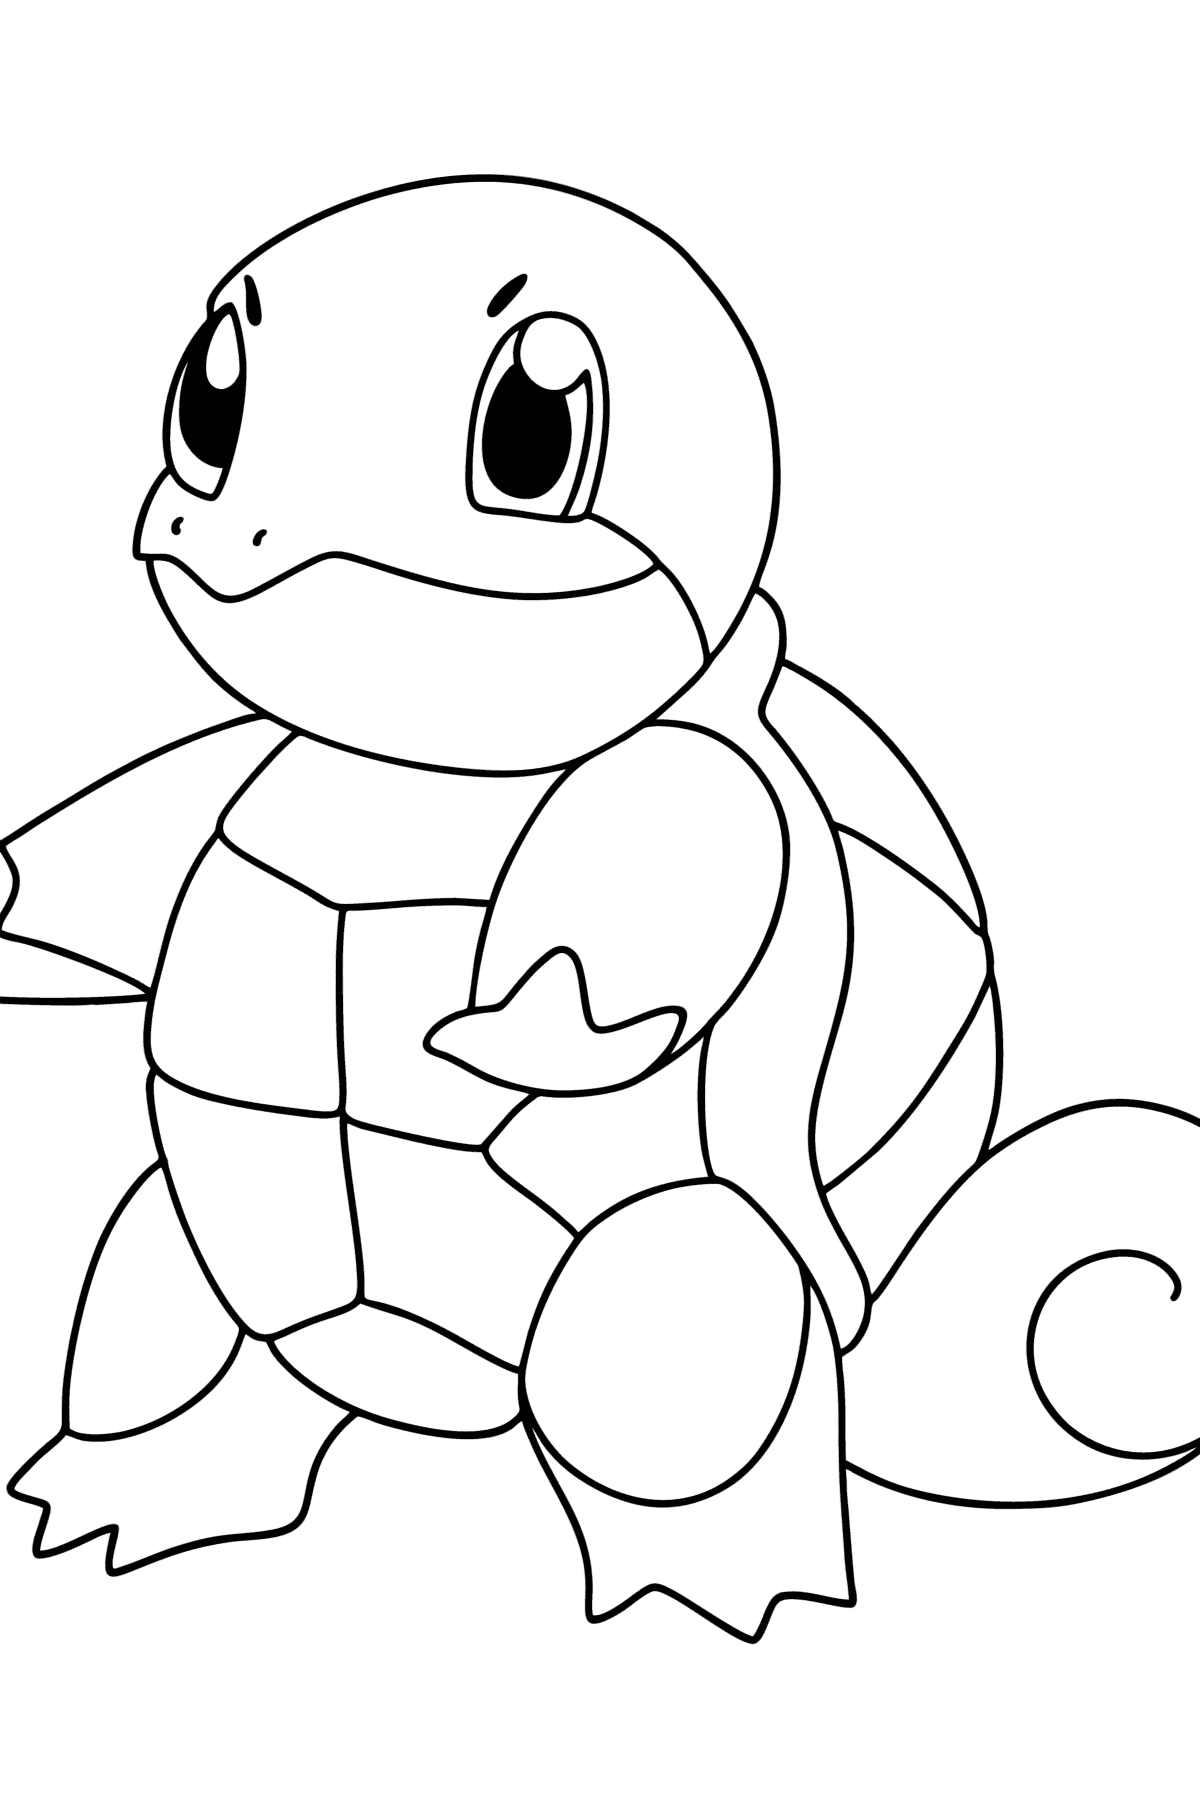 Coloring page Pokémon Go Squirtle ♥ Online and Print for Free